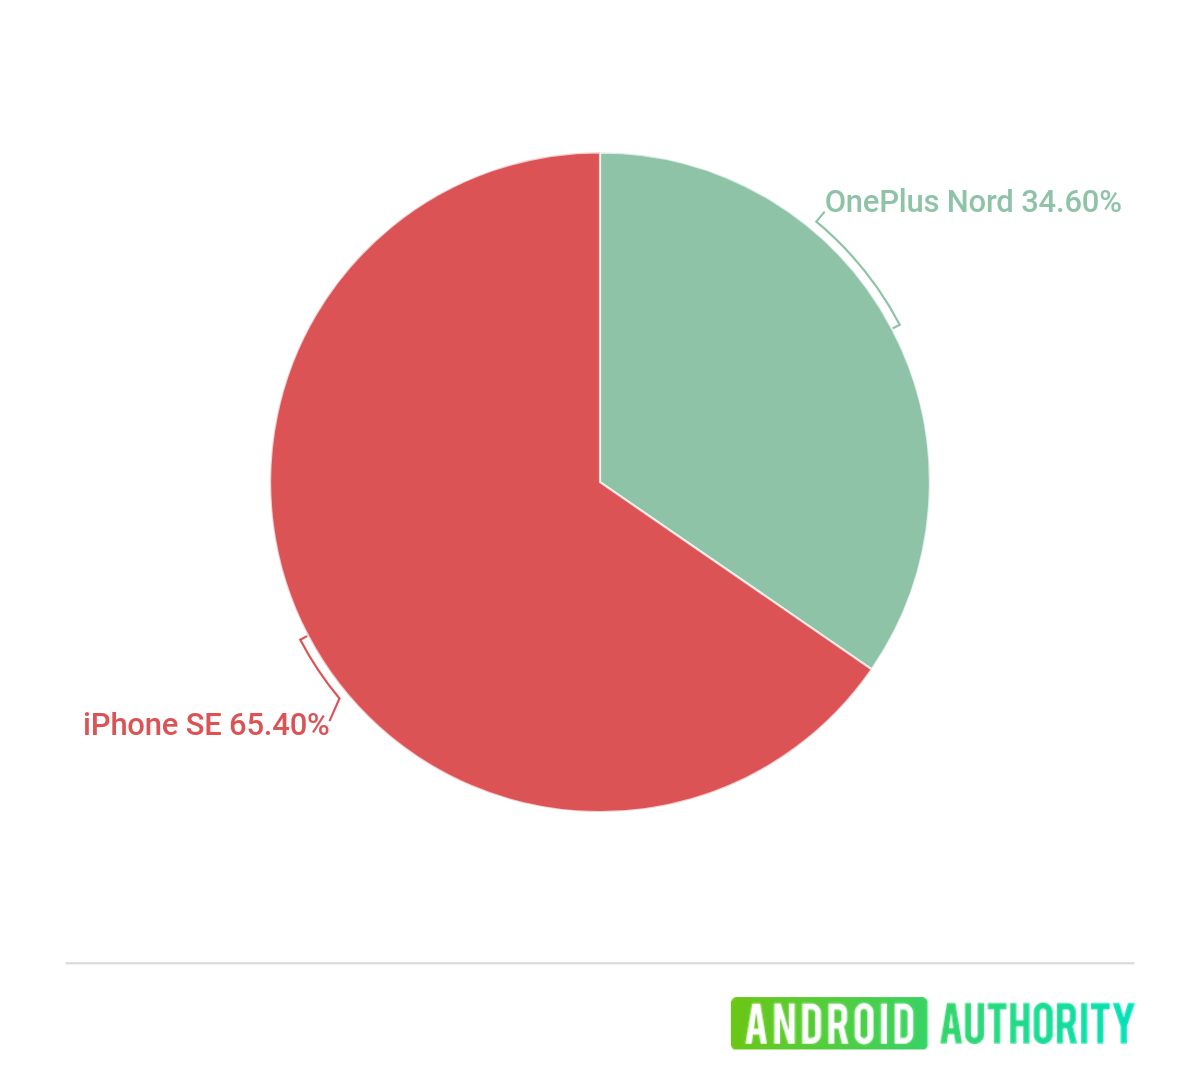 oneplus nord or the iphone se shootout poll results